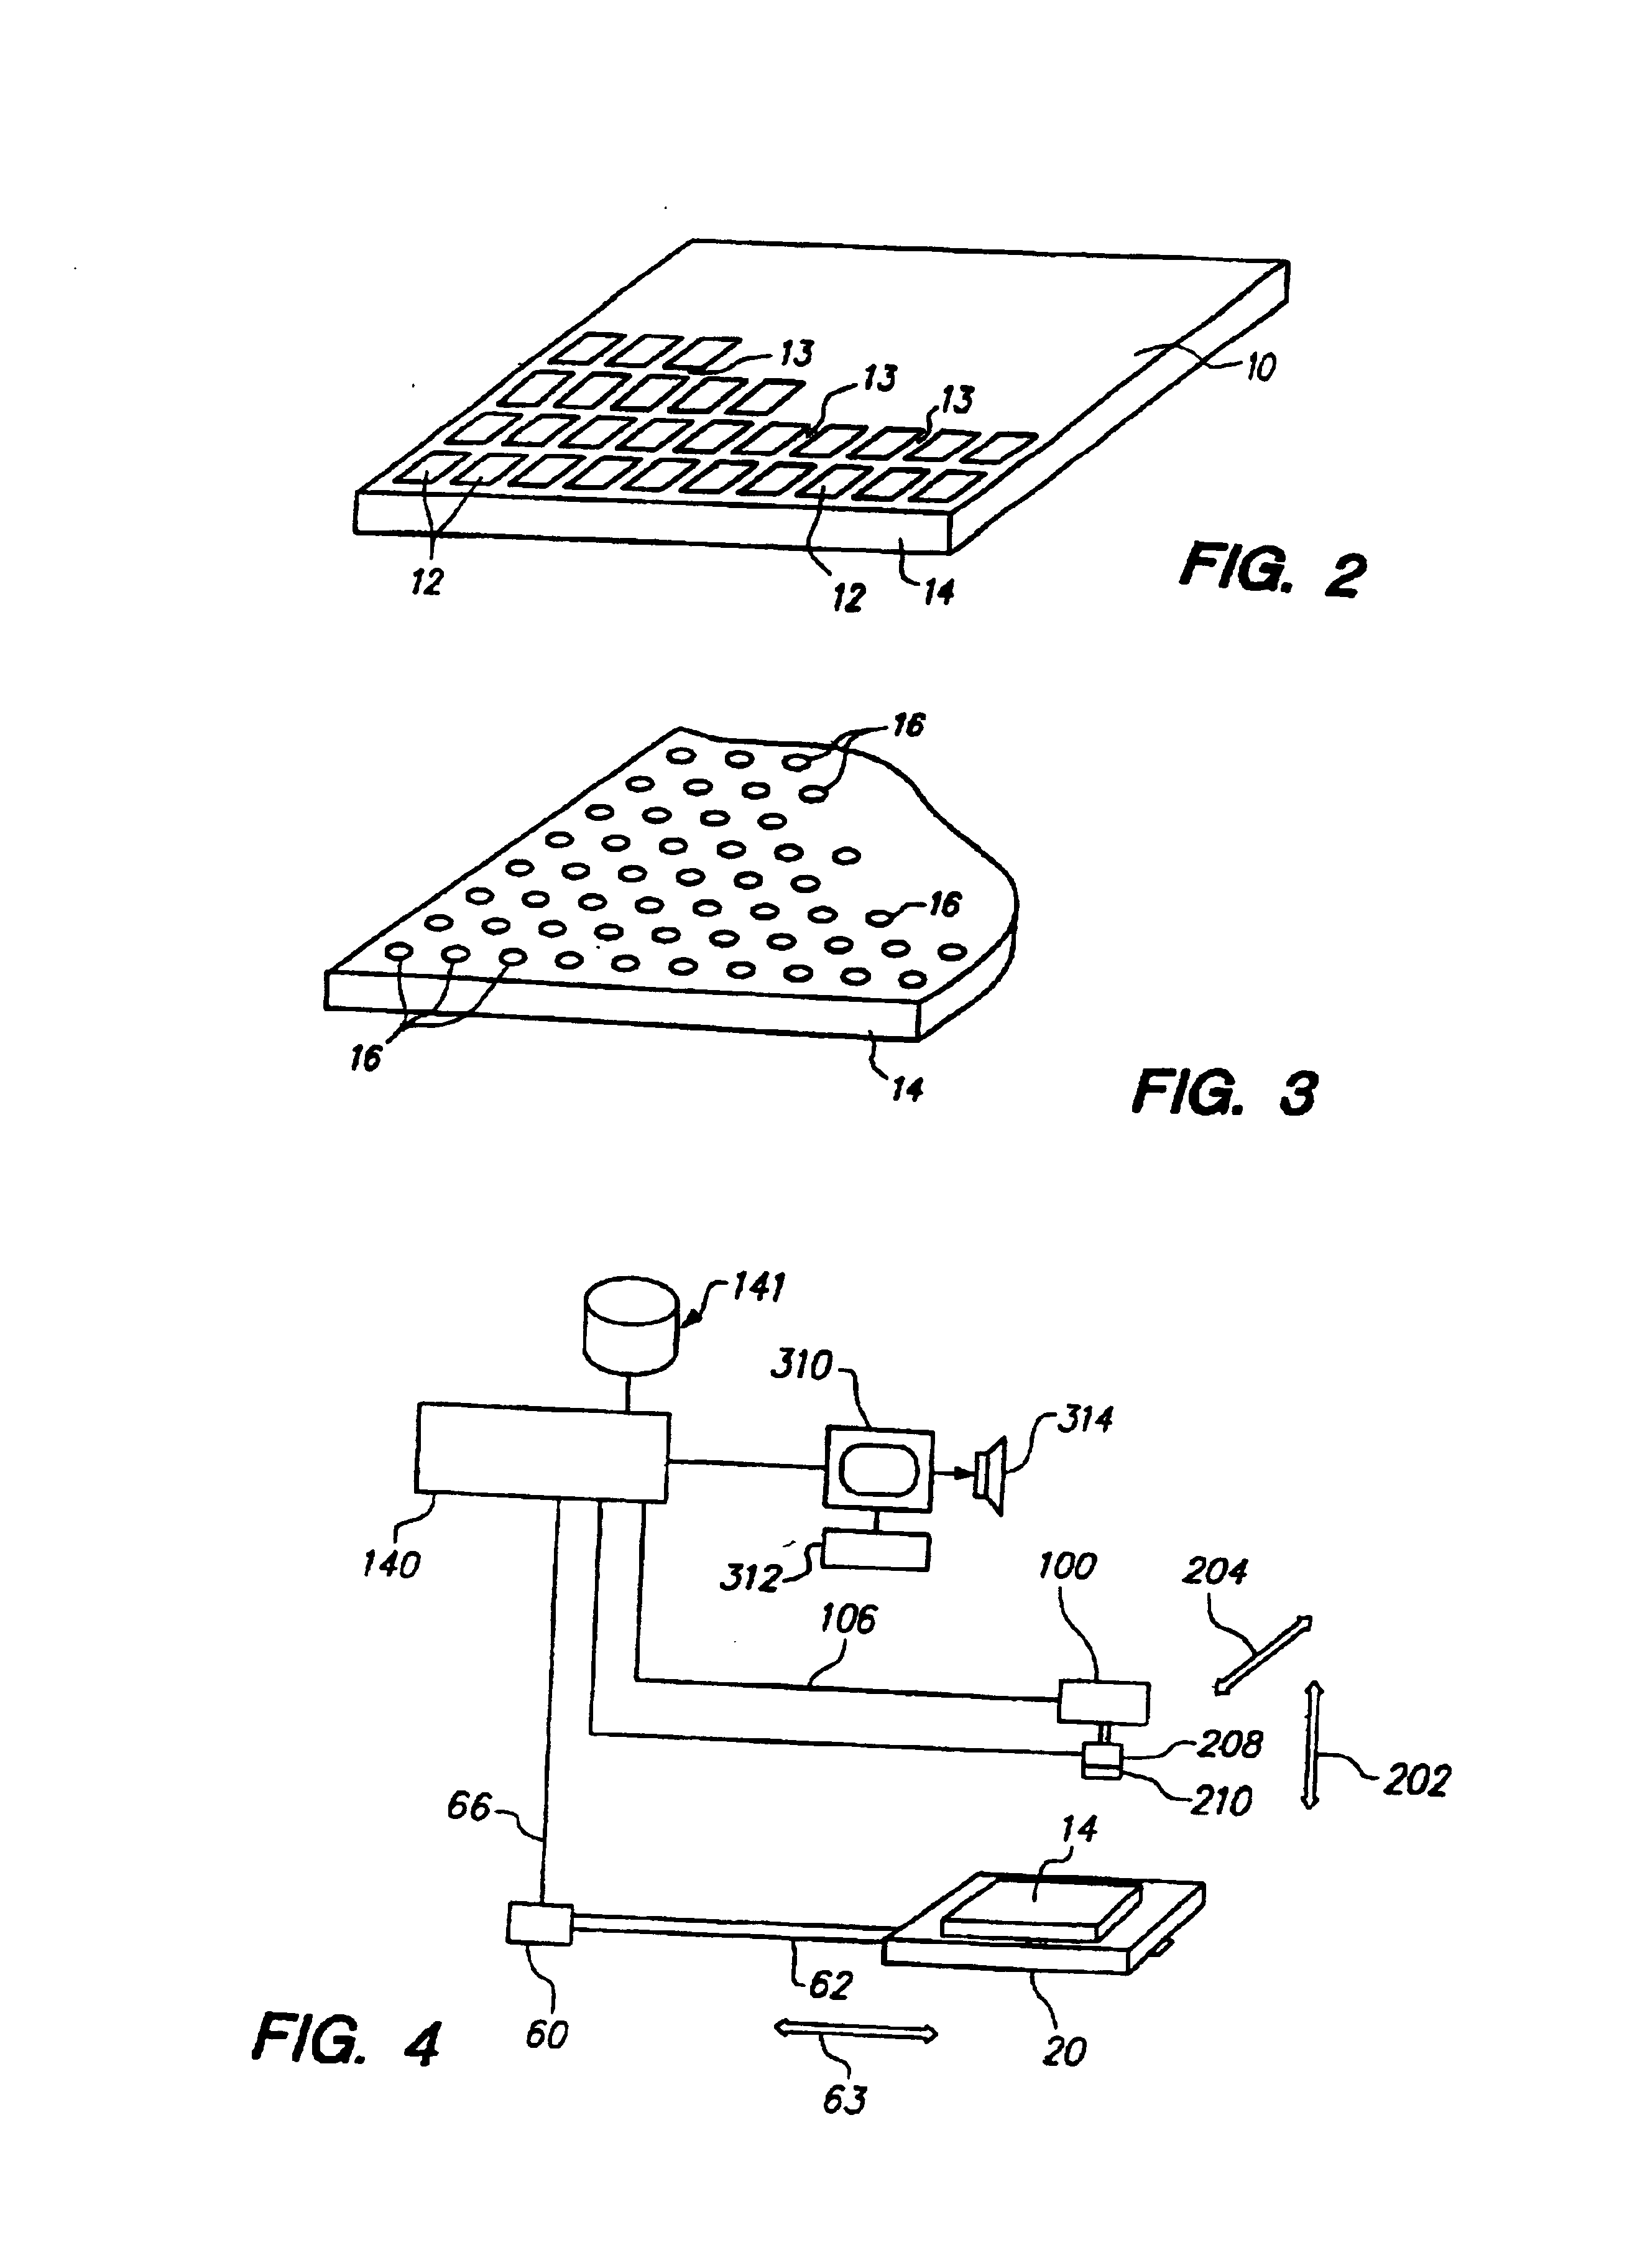 Use of ionic liquids for fabrication of polynucleotide arrays